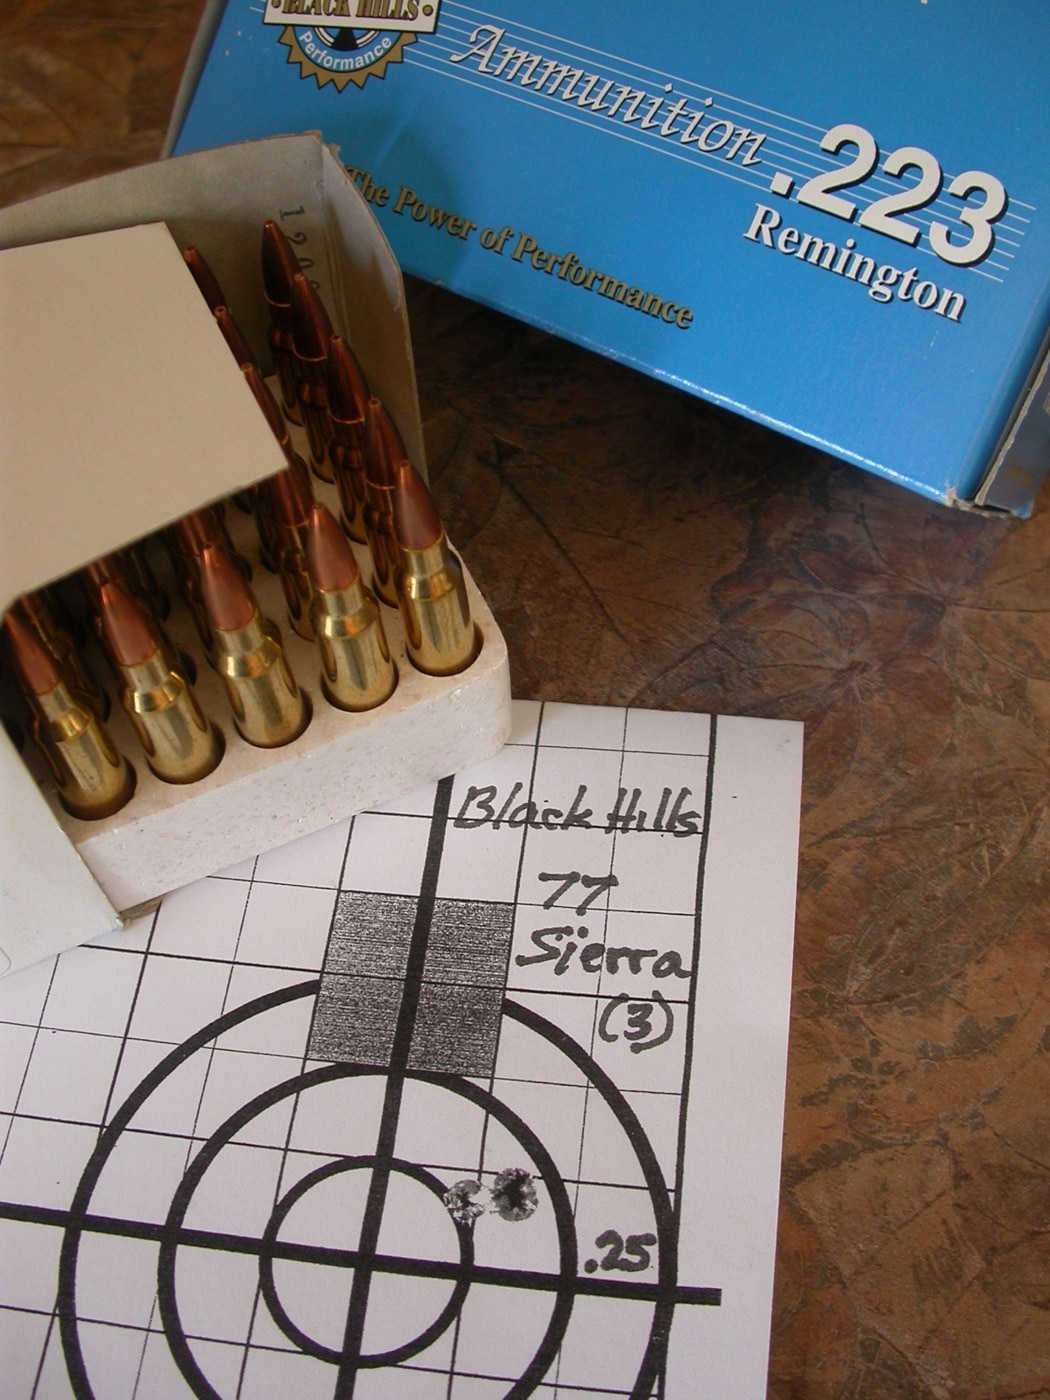 black hills ammo with target